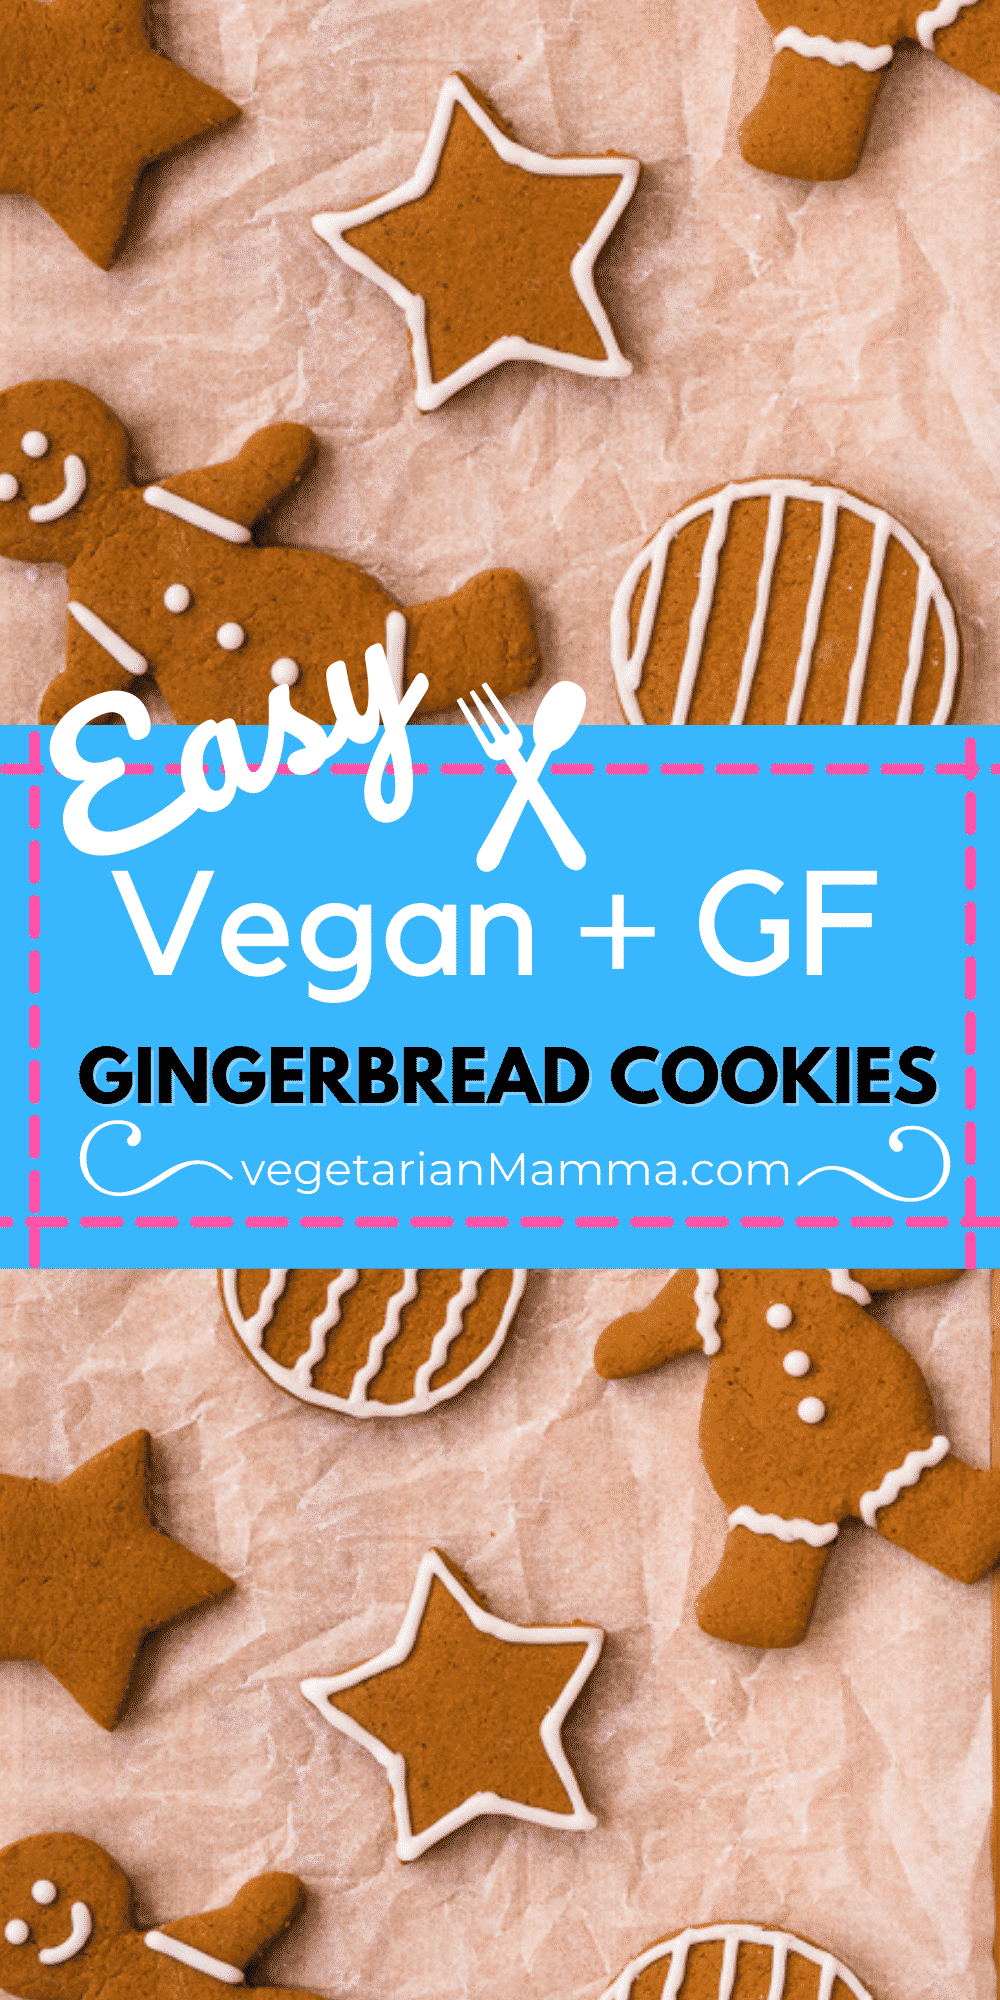 Vegan Gingerbread Cookies are the ultimate Christmas cookies! Decorate them with this homemade vegan icing for the best holiday treat you can make together in just a few hours. #veganbaking #glutenfreecookies